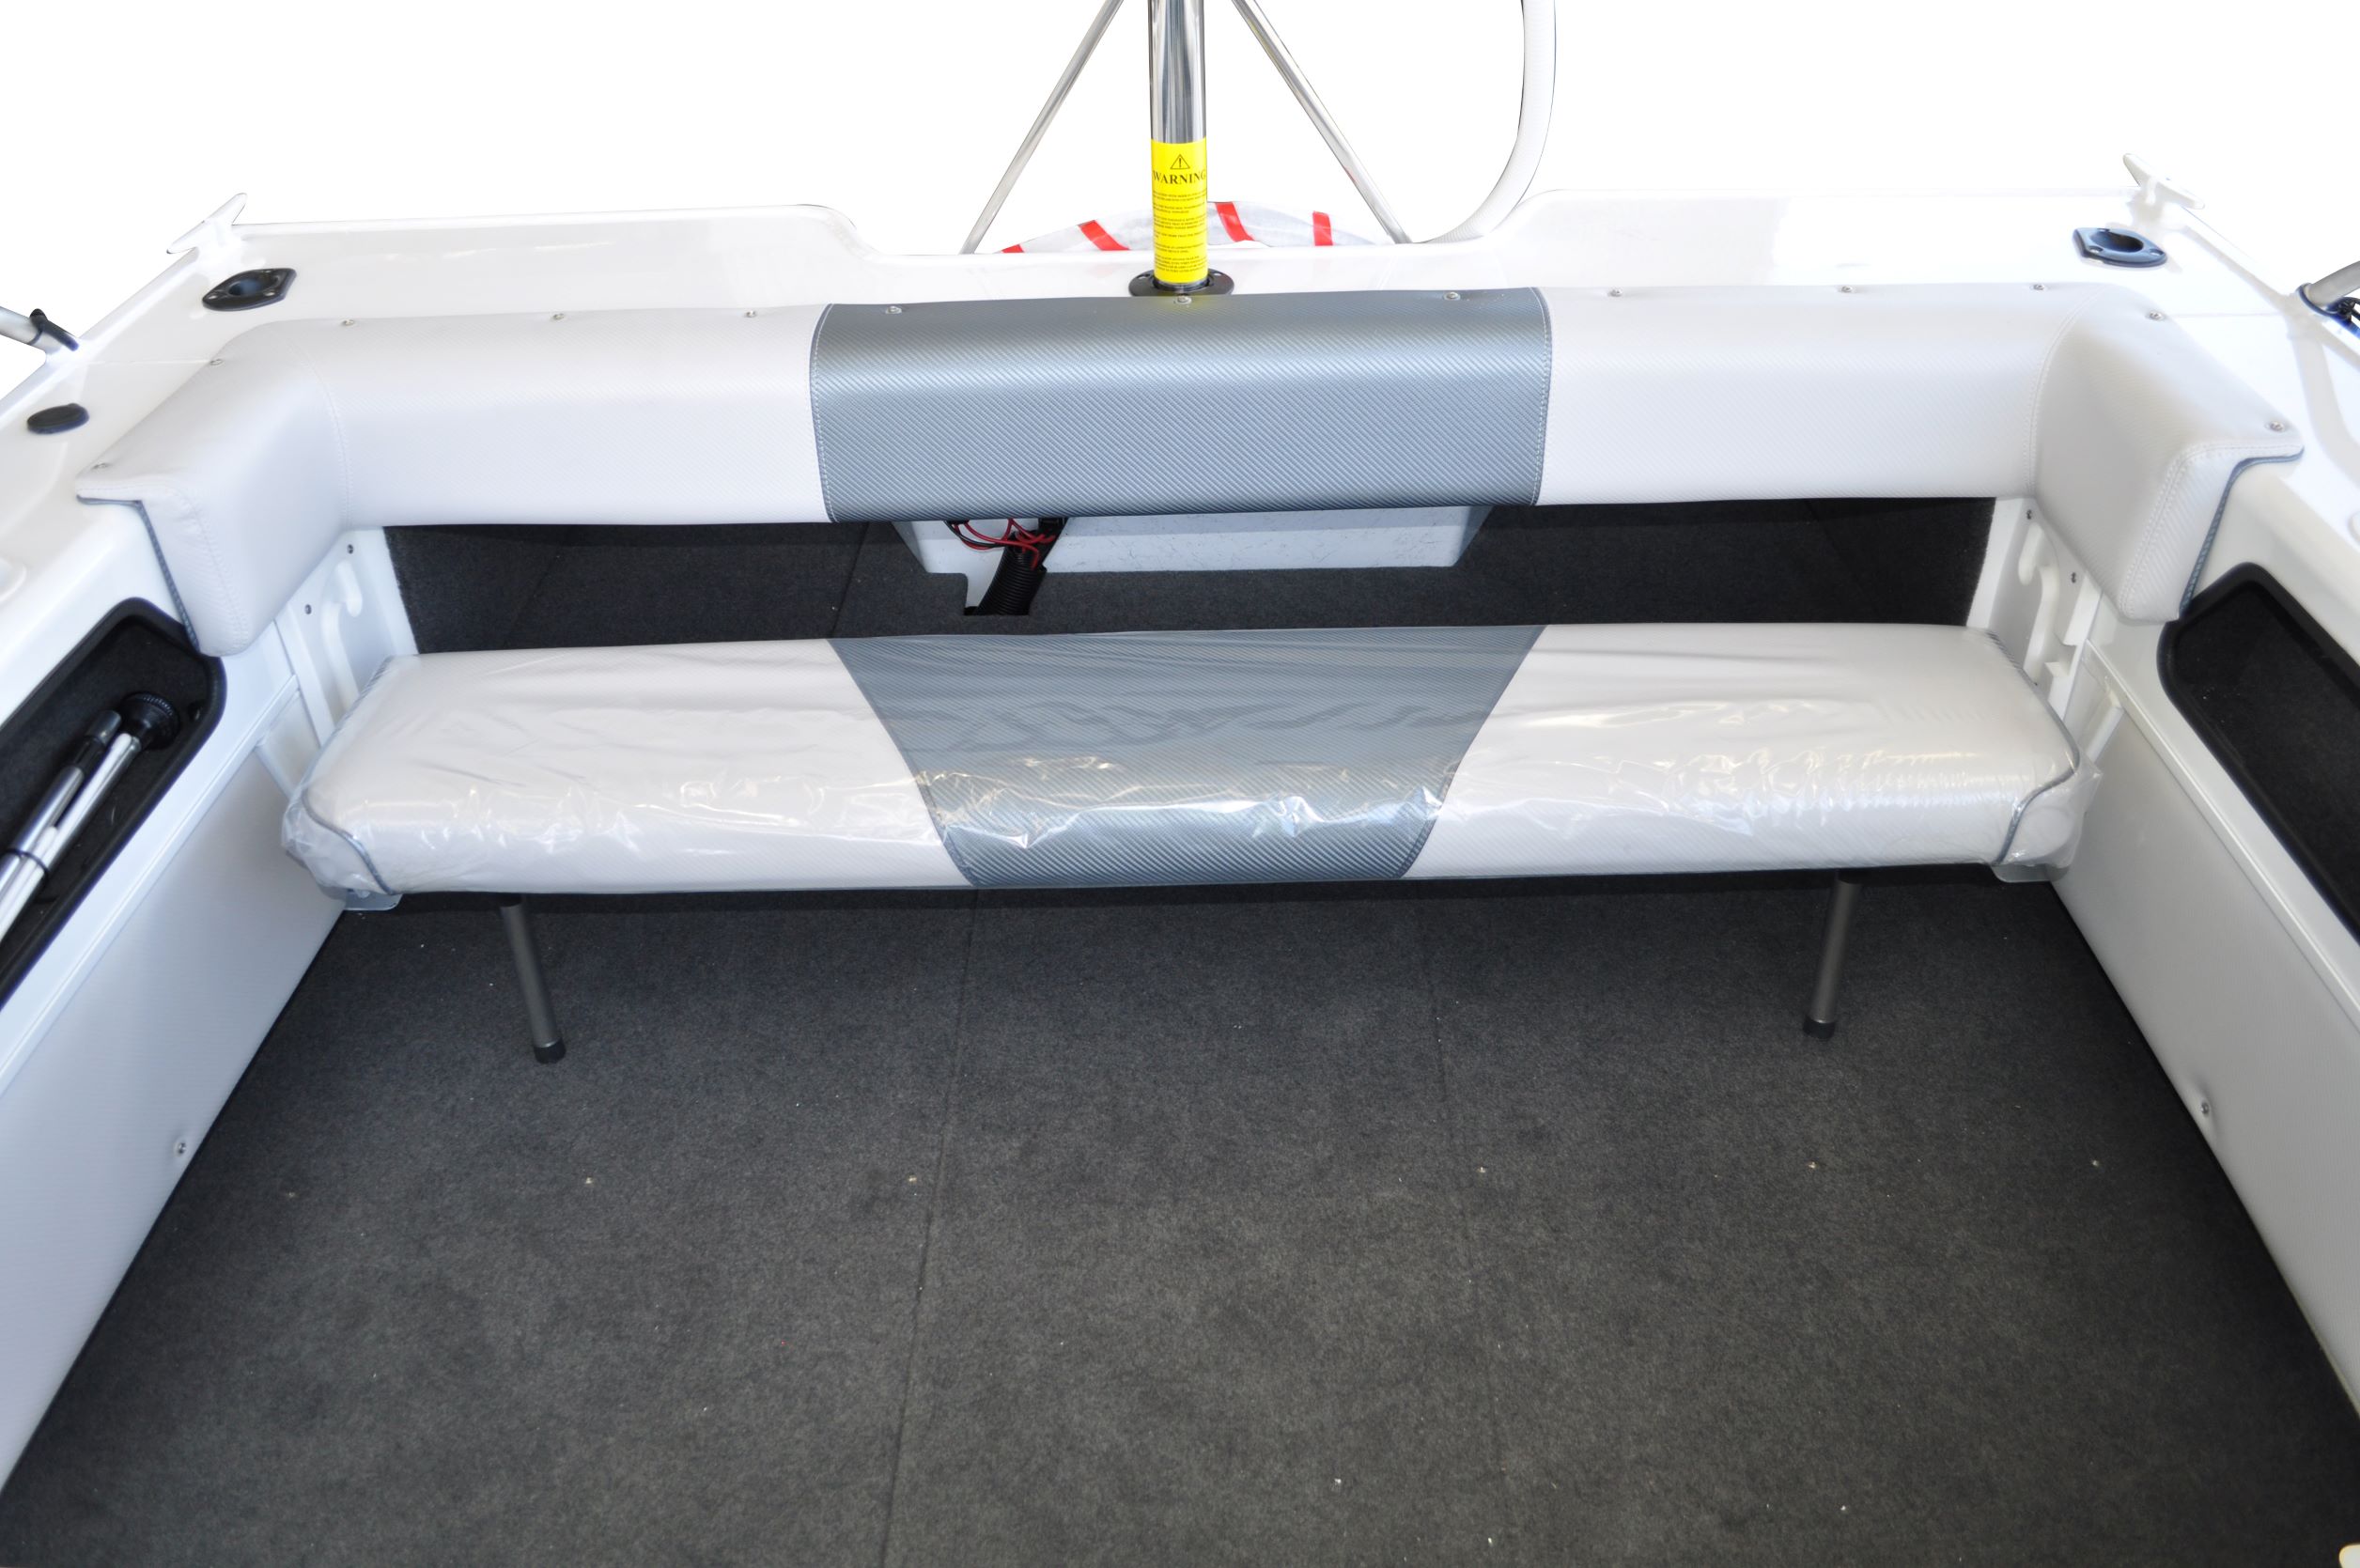 Deluxe Fishing Boat Seat, Grey White Style, Boat Yacht Marine Seats